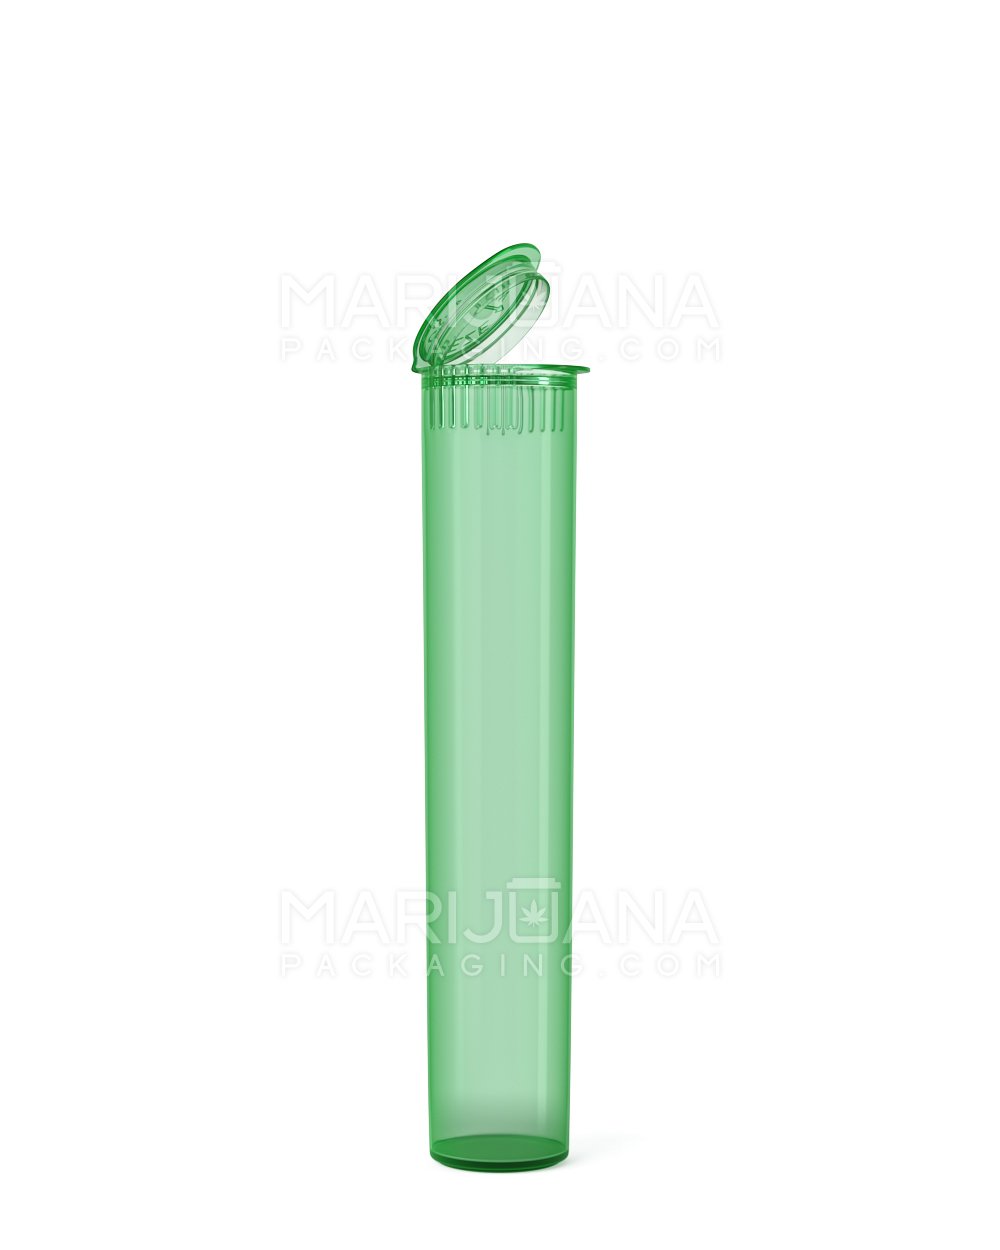 Child Resistant | Pop Top Translucent Plastic Pre-Roll Tubes | 95mm - Green - 1000 Count - 1